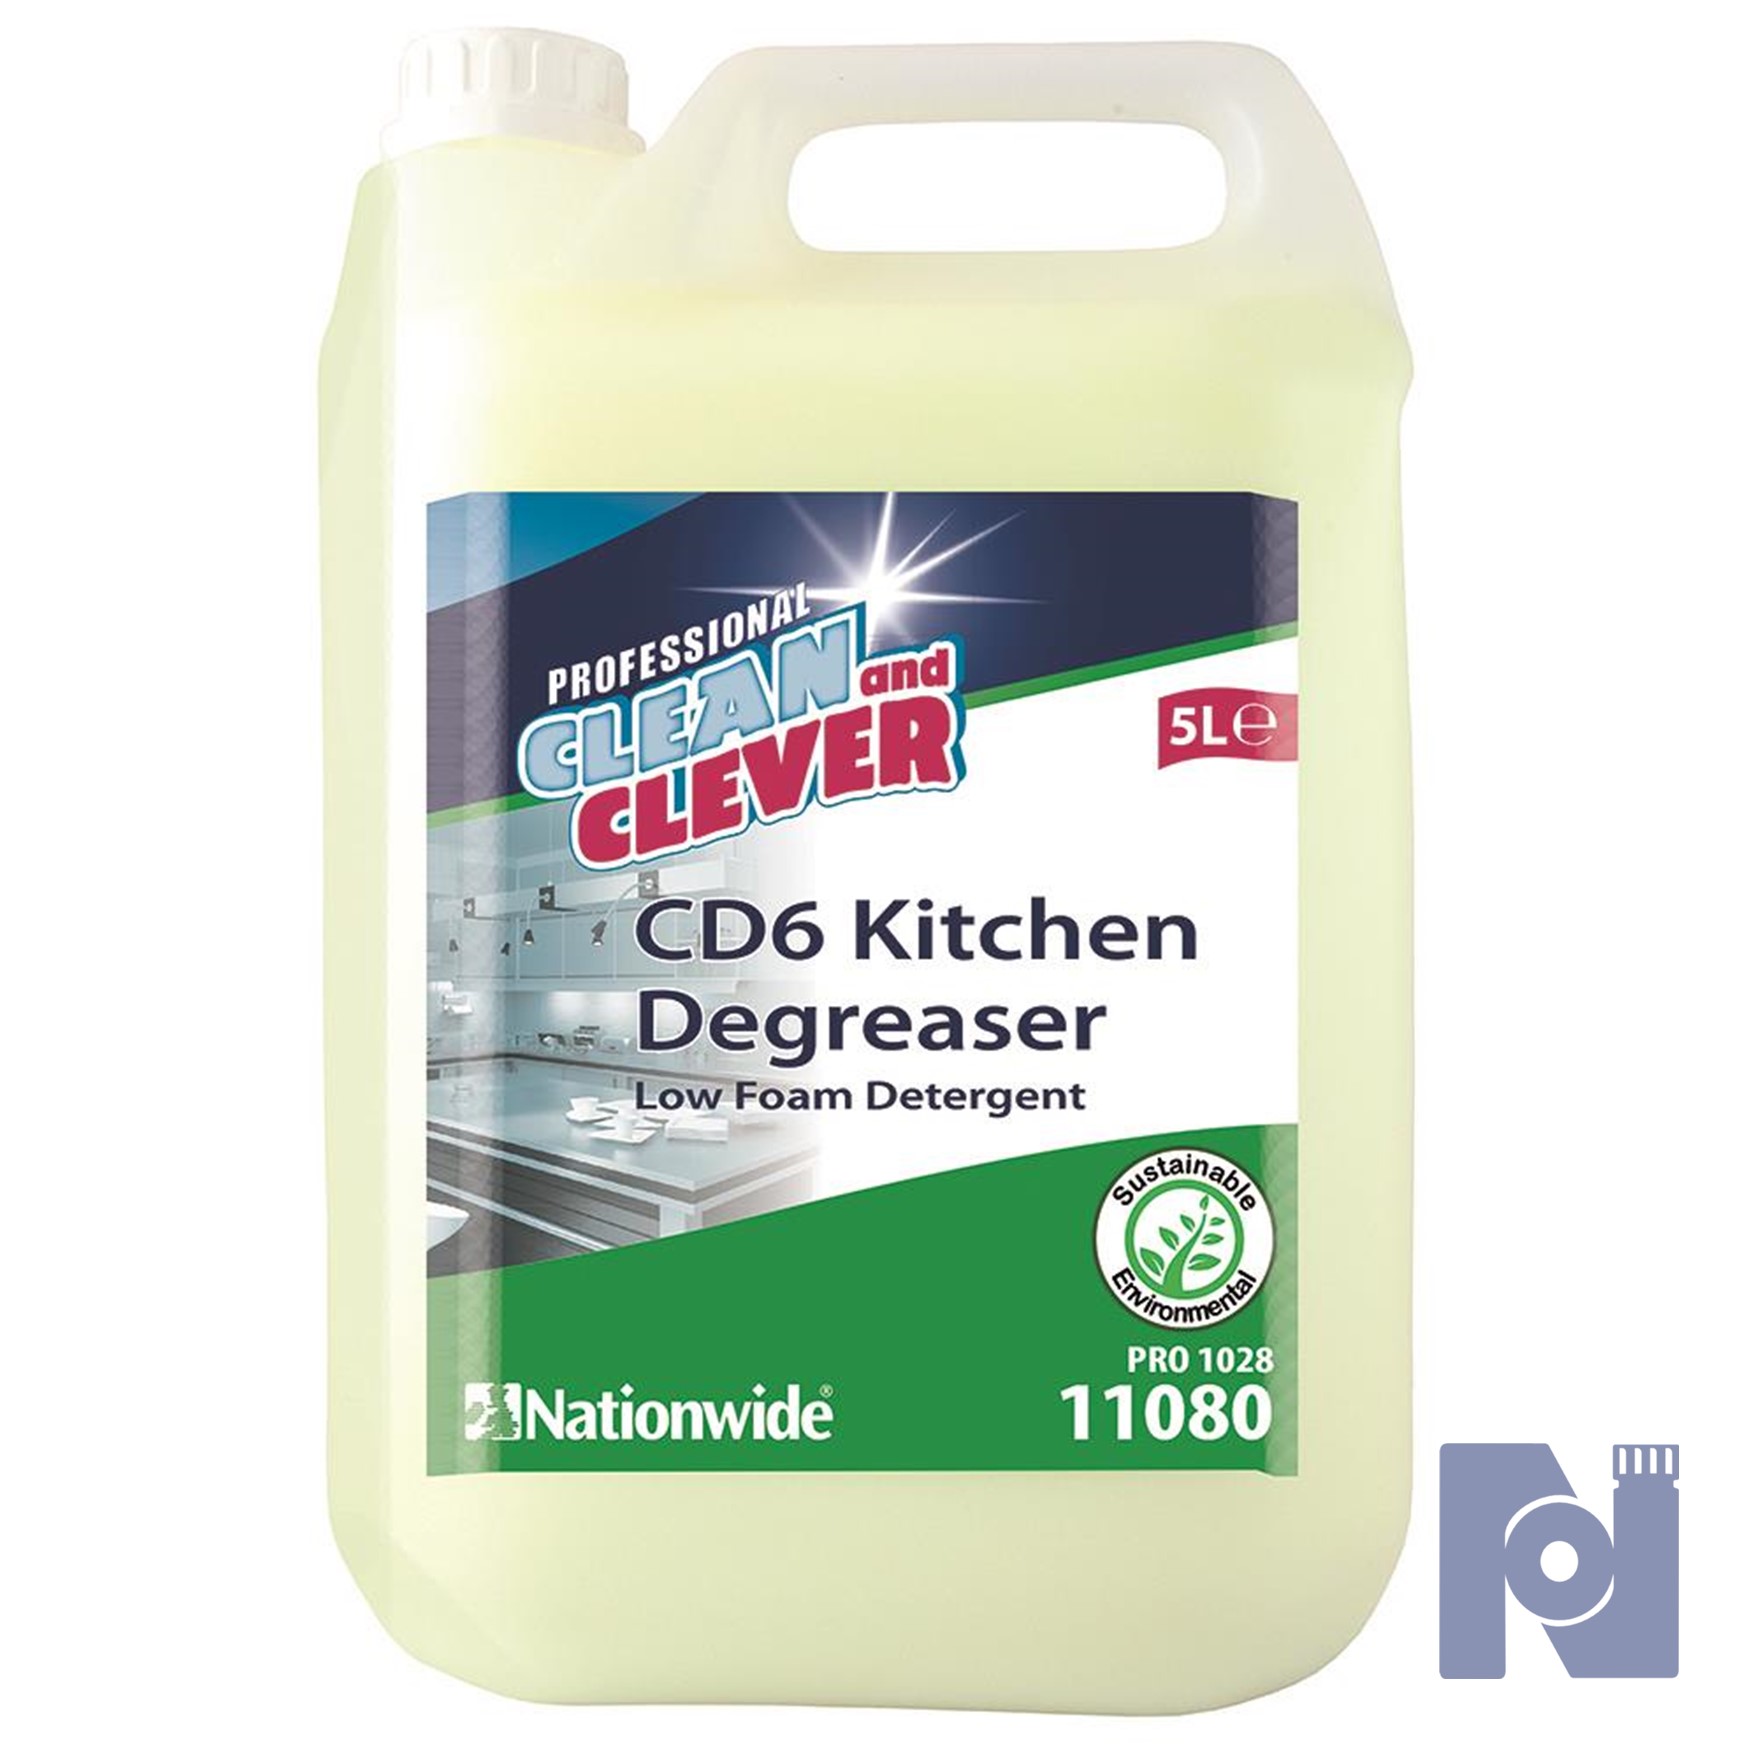 Clean & Clever CD6 Kitchen Degreaser